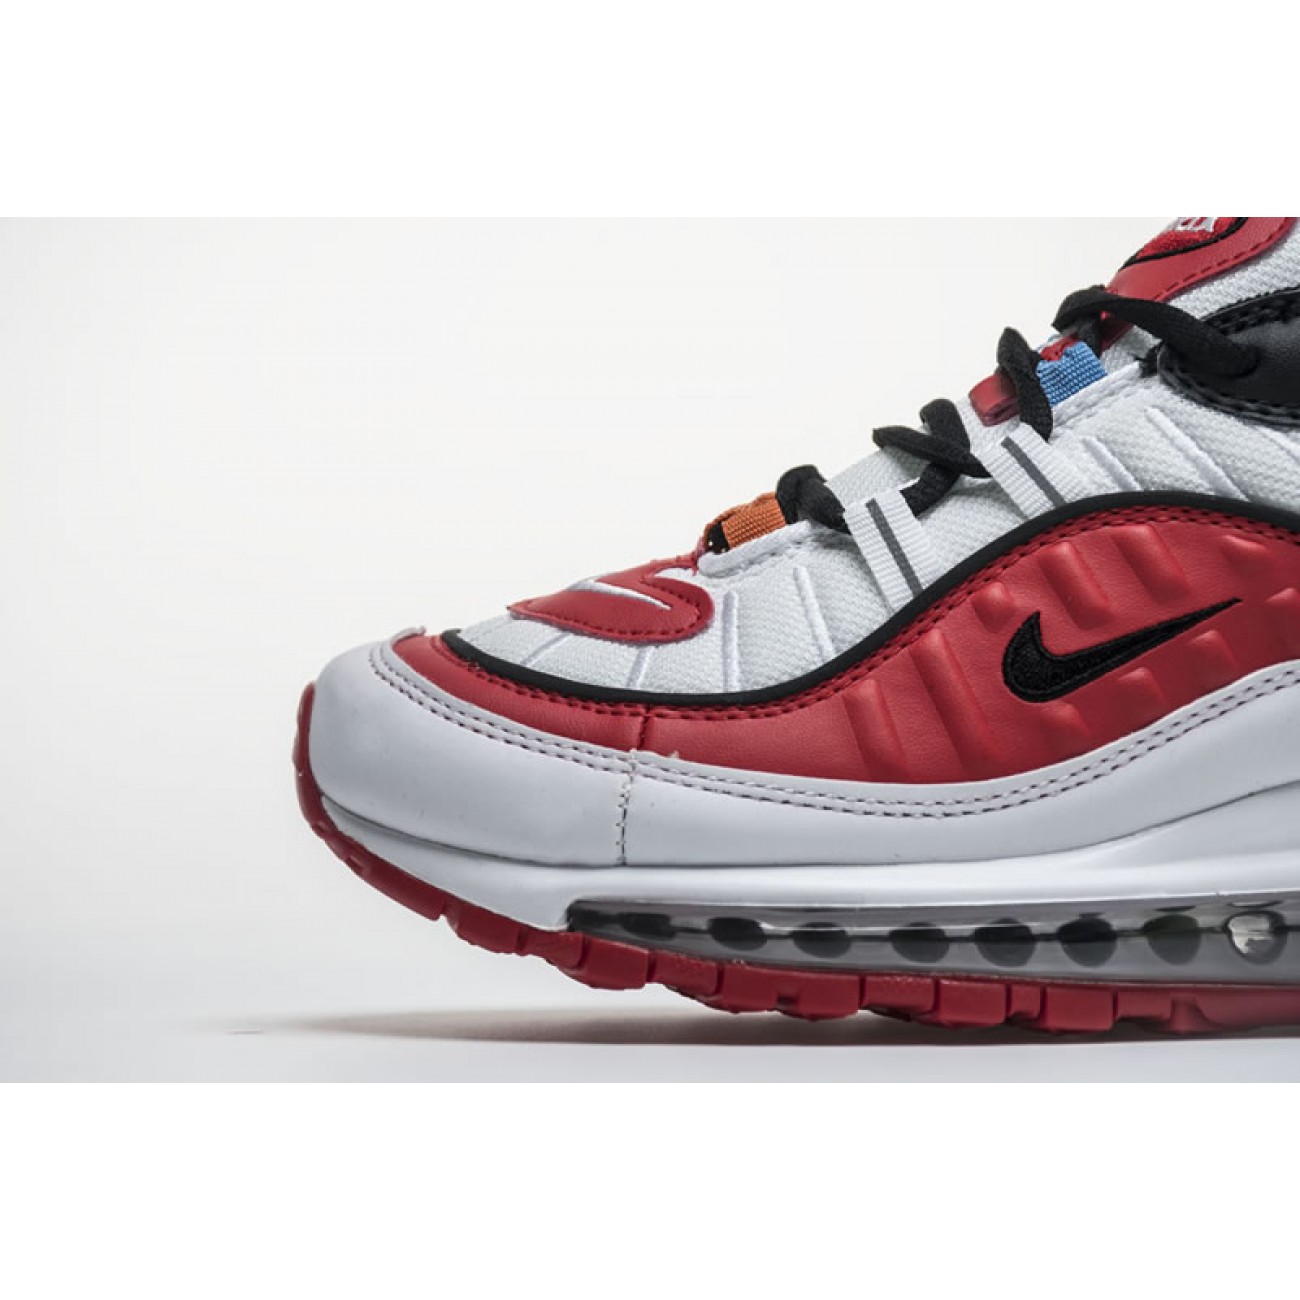 Off-White Virgil Abloh x Nike Air Max 98 White/Red Wmns Mens Size Shoes For Sale AJ6302-113